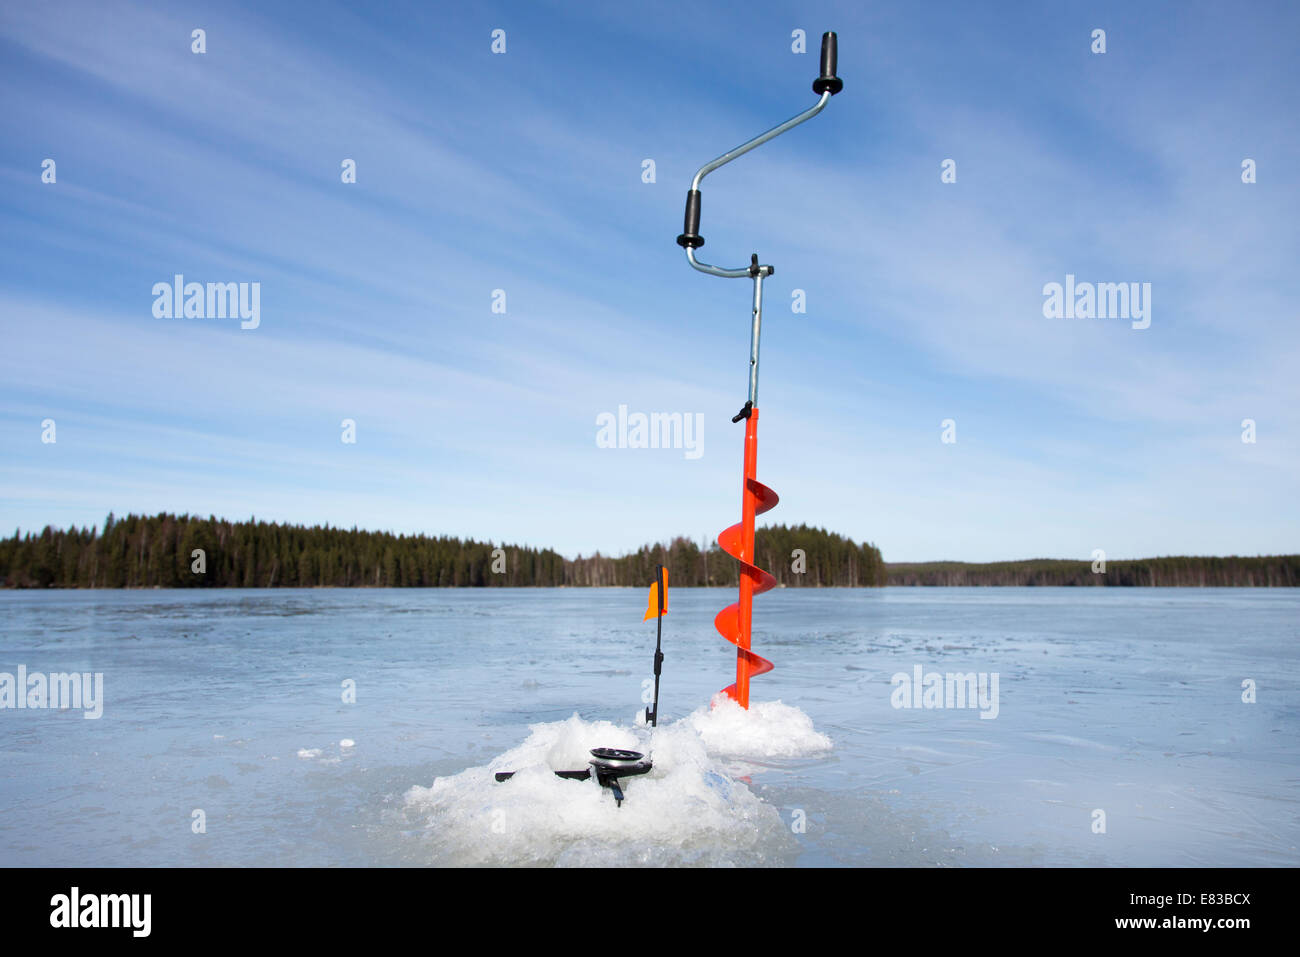 Hand ice auger and tip-up ice fishing rod at frozen lake at Winter ,  Finland Stock Photo - Alamy